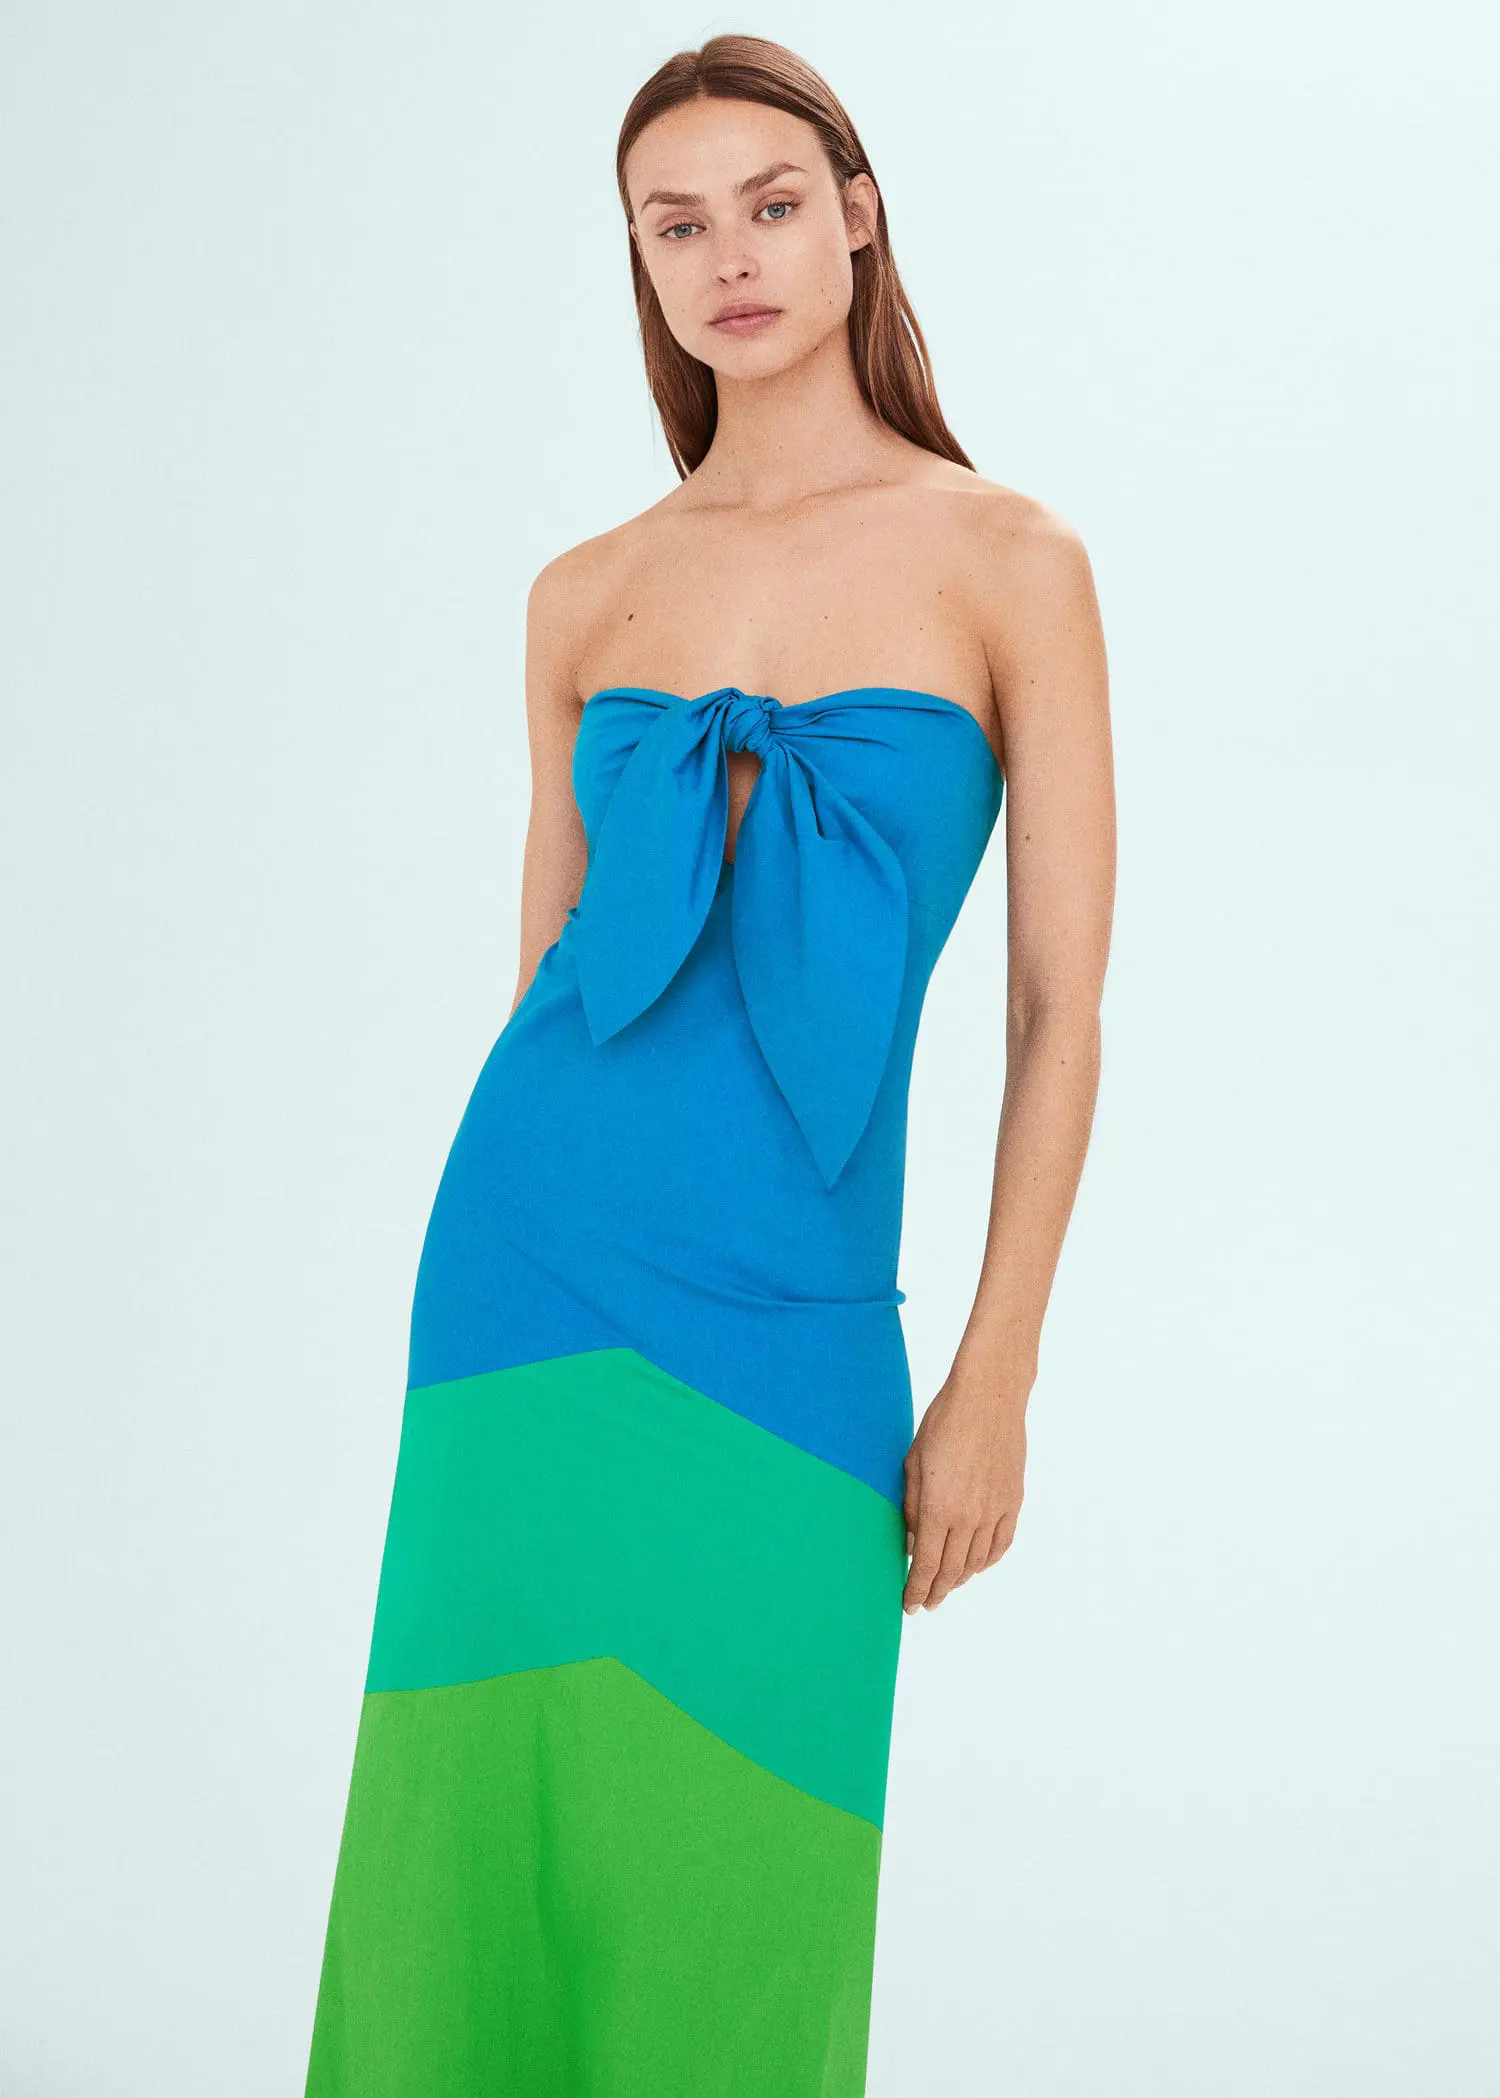 Mango Multi-coloured dress with knot neckline. a woman wearing a blue and green dress. 